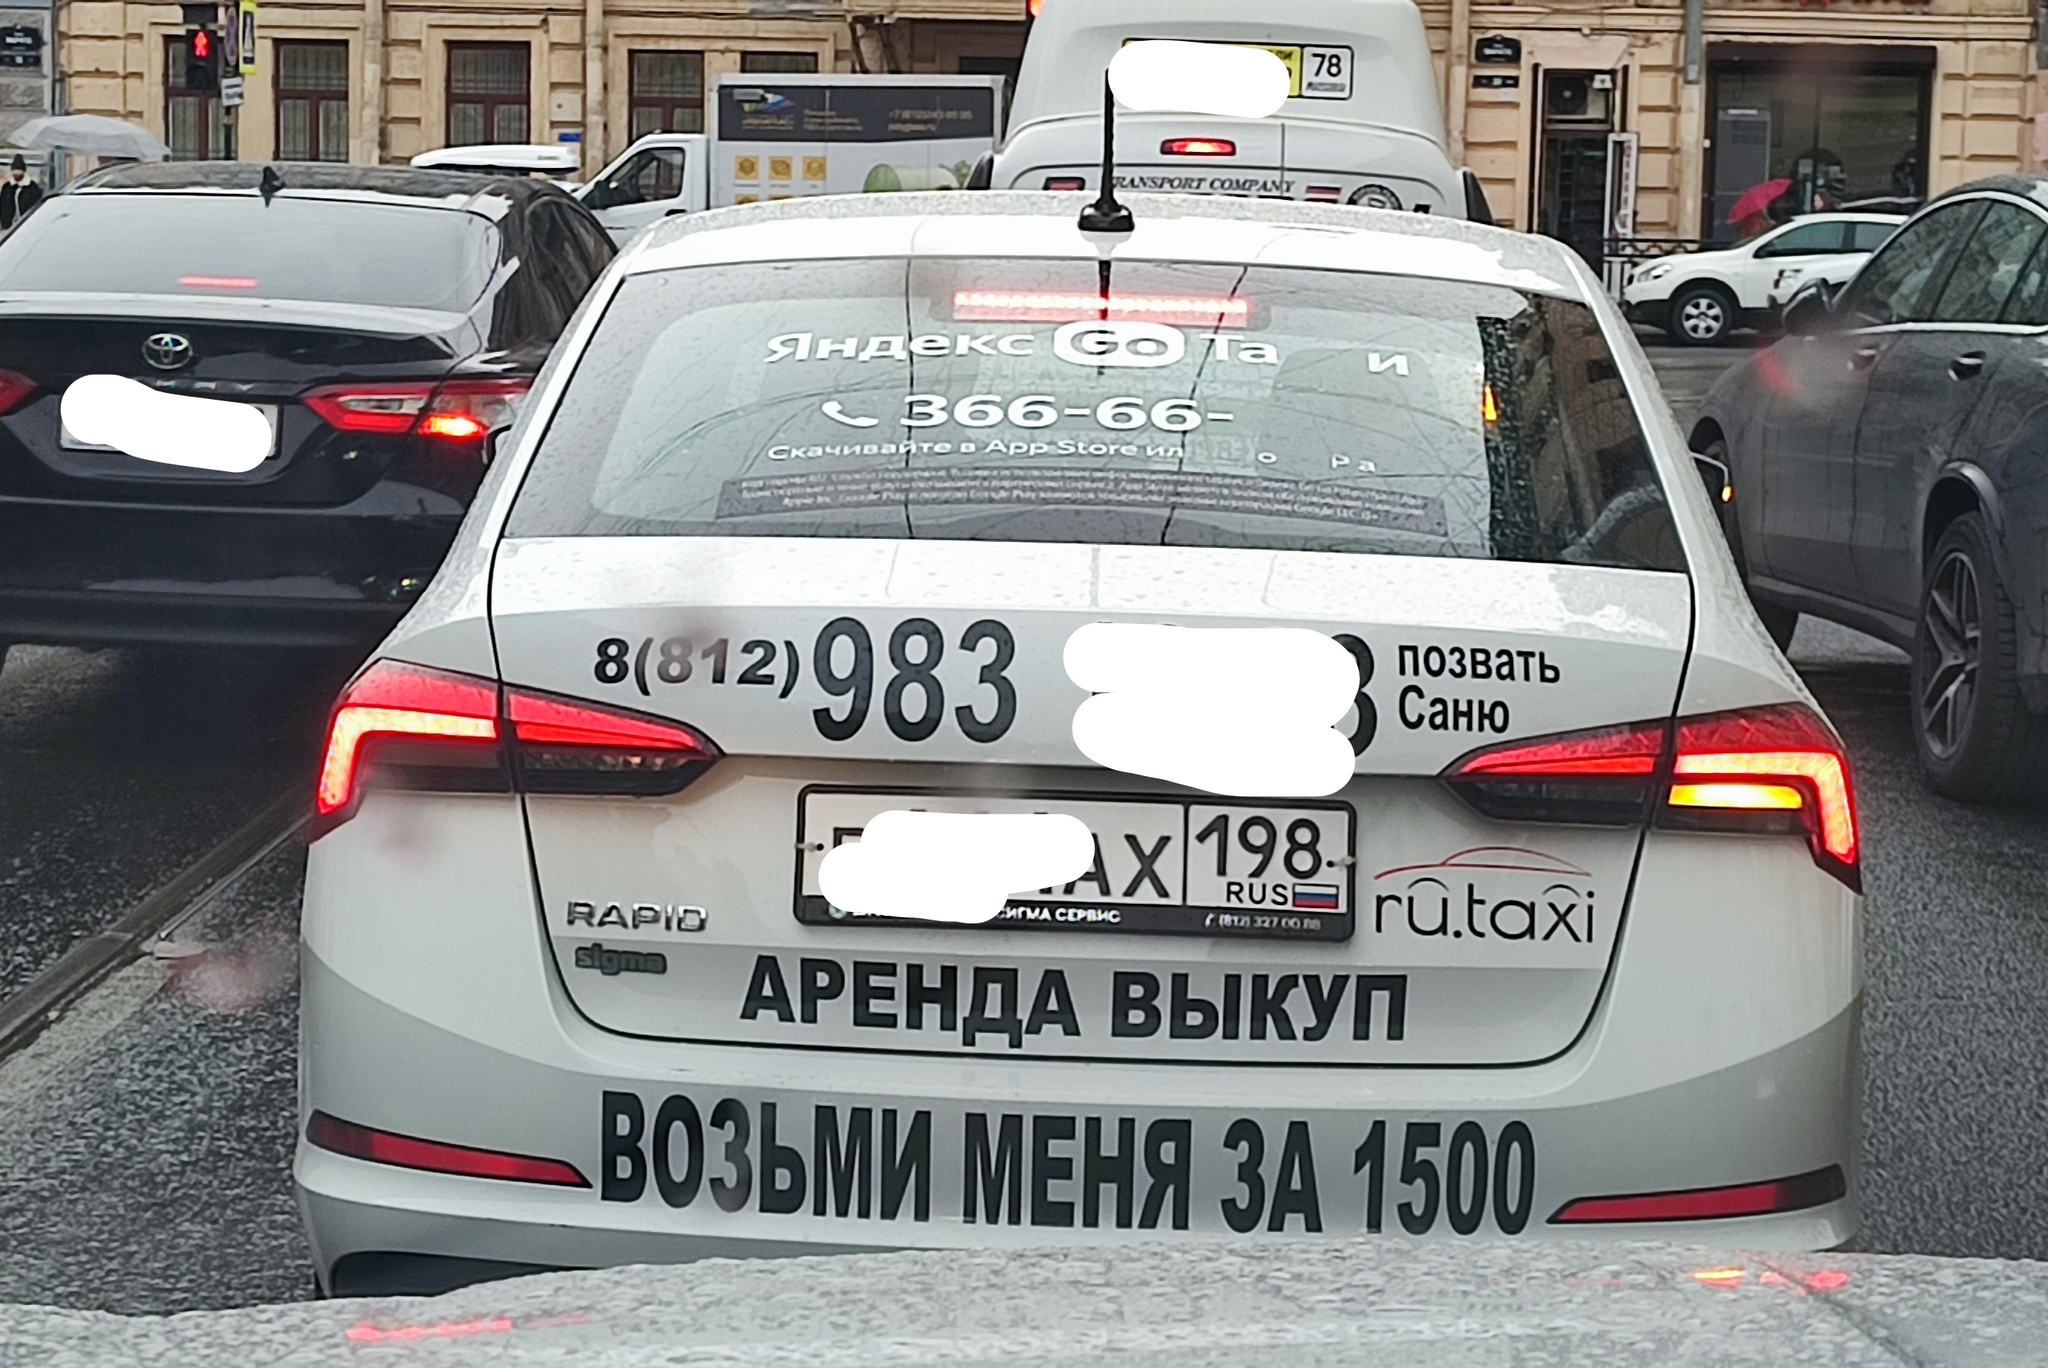 Again about taxis and non-traditional orientation - My, Taxi, Strange humor, Lettering on the car